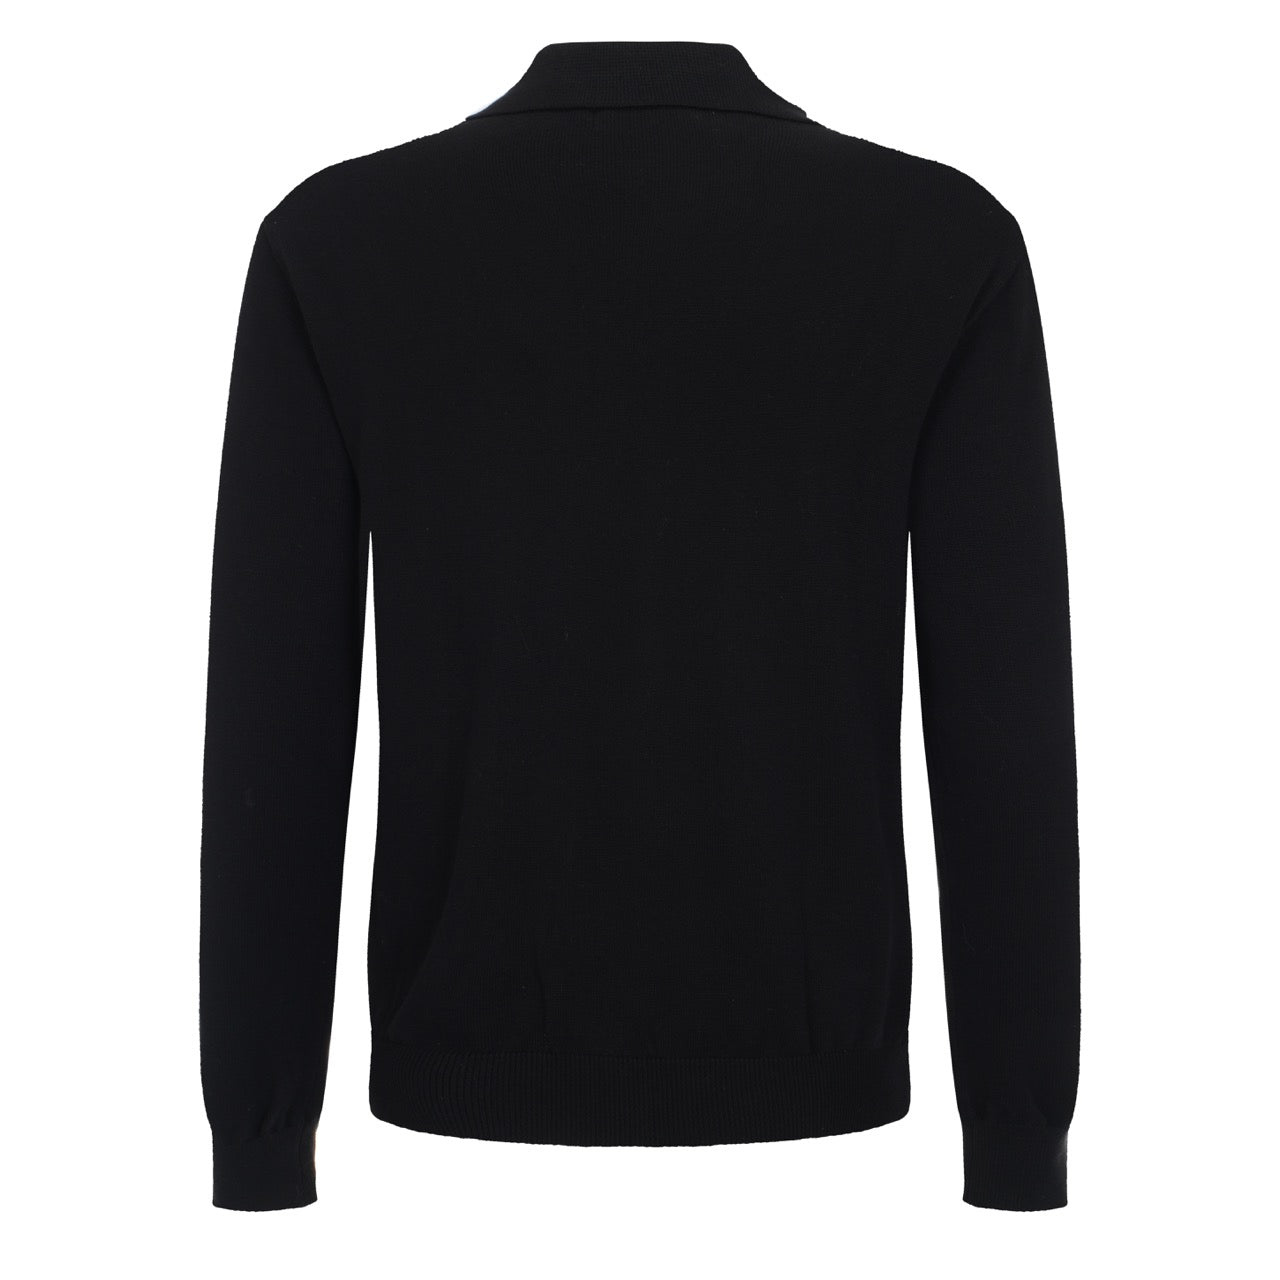 Men's Black Long-Sleeve Zip Knitted Cardigan With Double White Racing Stripes